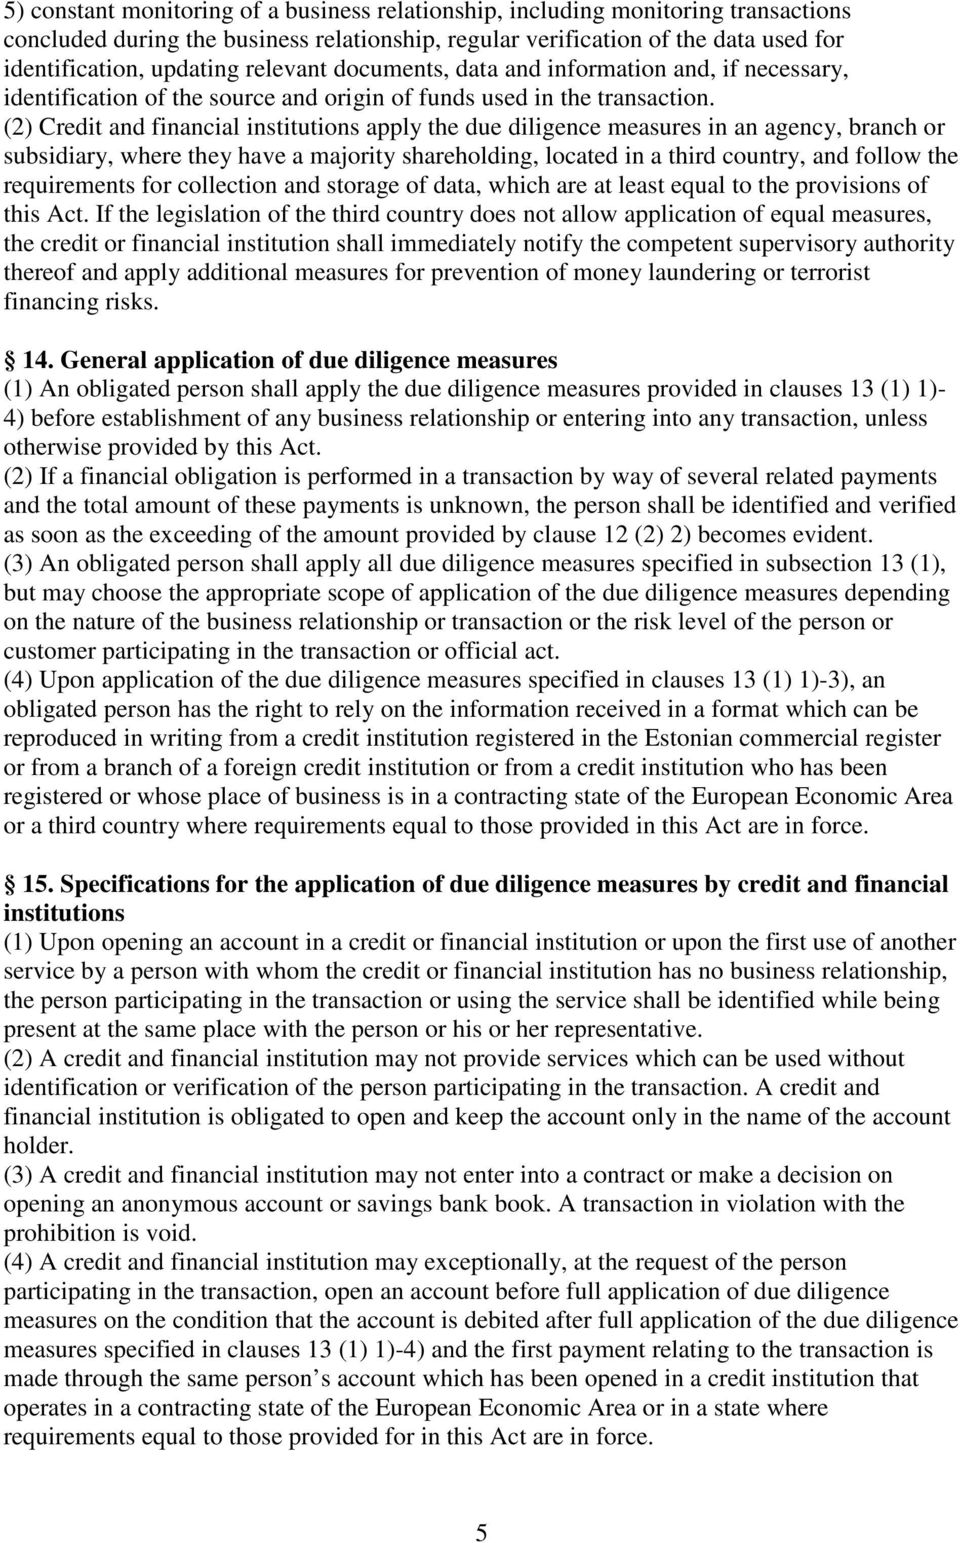 (2) Credit and financial institutions apply the due diligence measures in an agency, branch or subsidiary, where they have a majority shareholding, located in a third country, and follow the